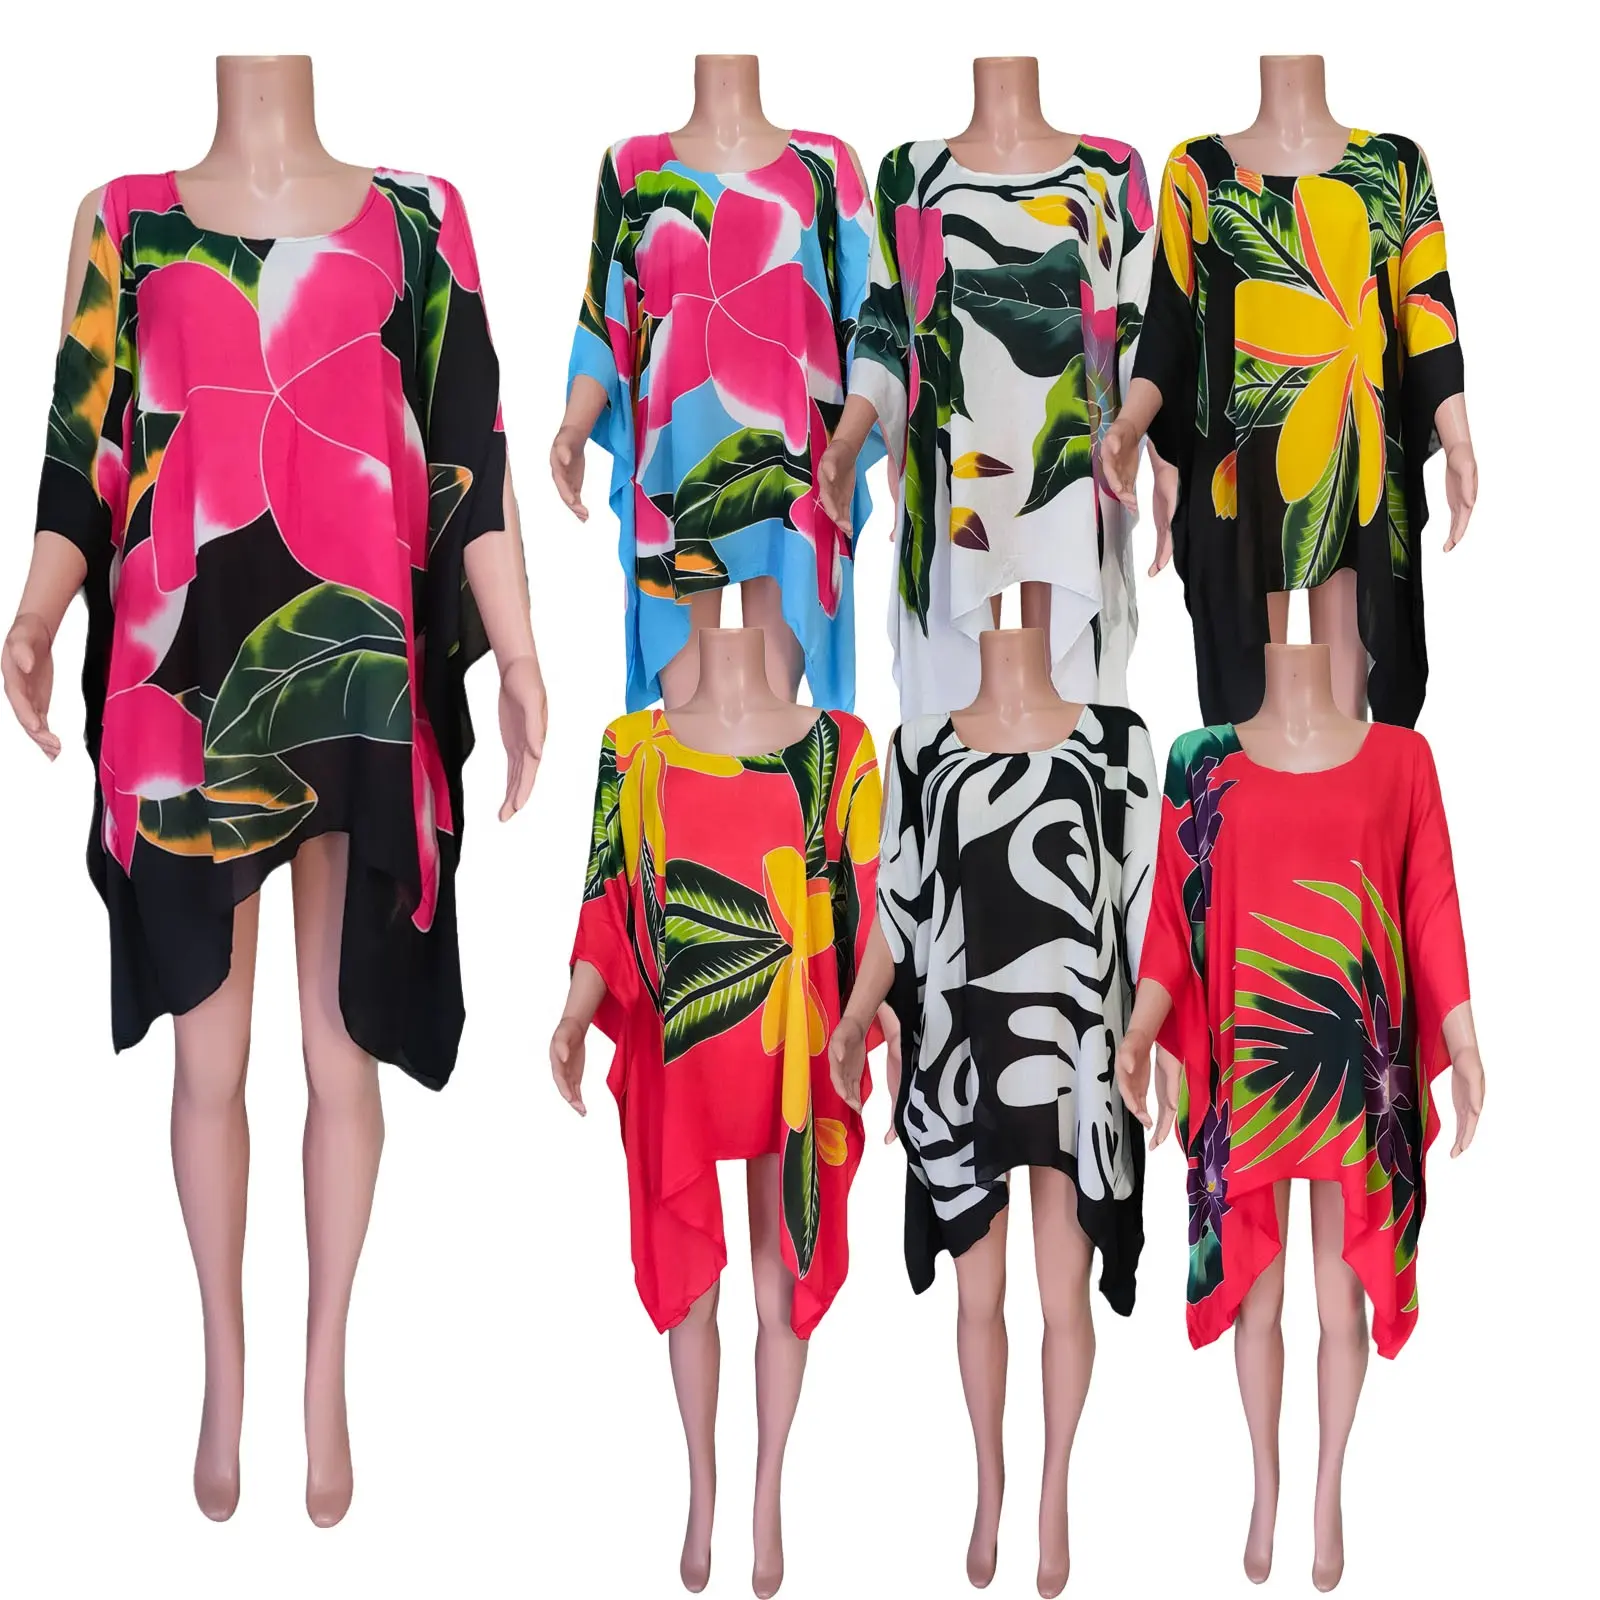 NEW Arrival Hand Painted Beach Poncho Women Dress Boho Loose Short Beach Dresses Swimsuit Cover up